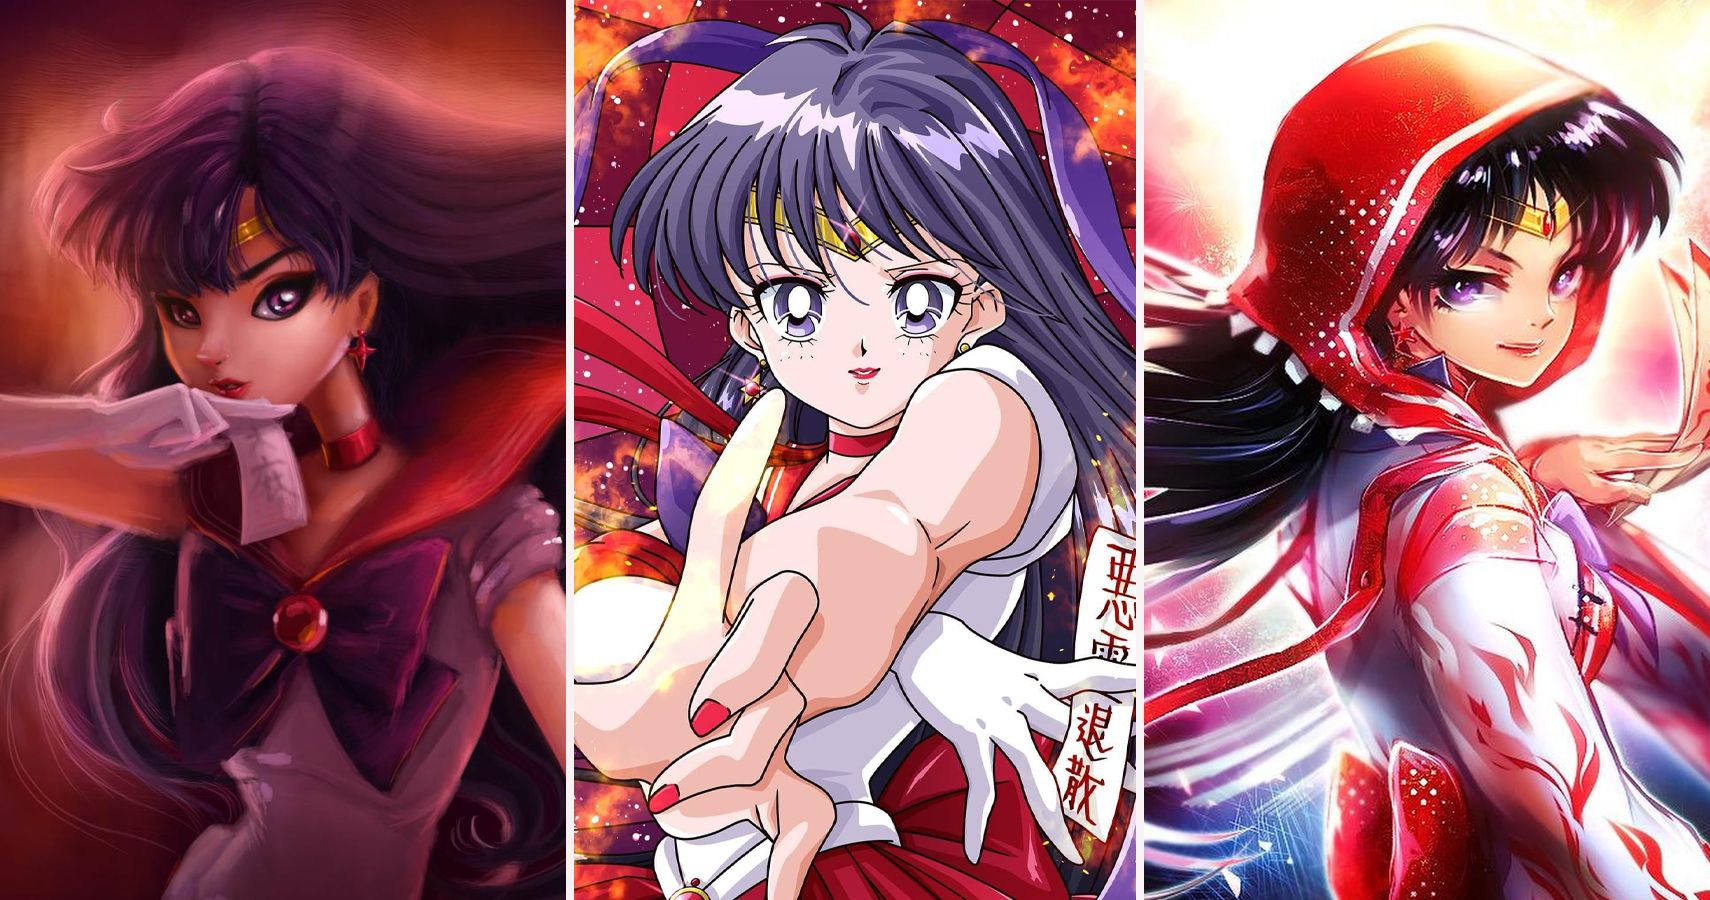 sailor moon 10 sailor mars fan art pictures you have to see.